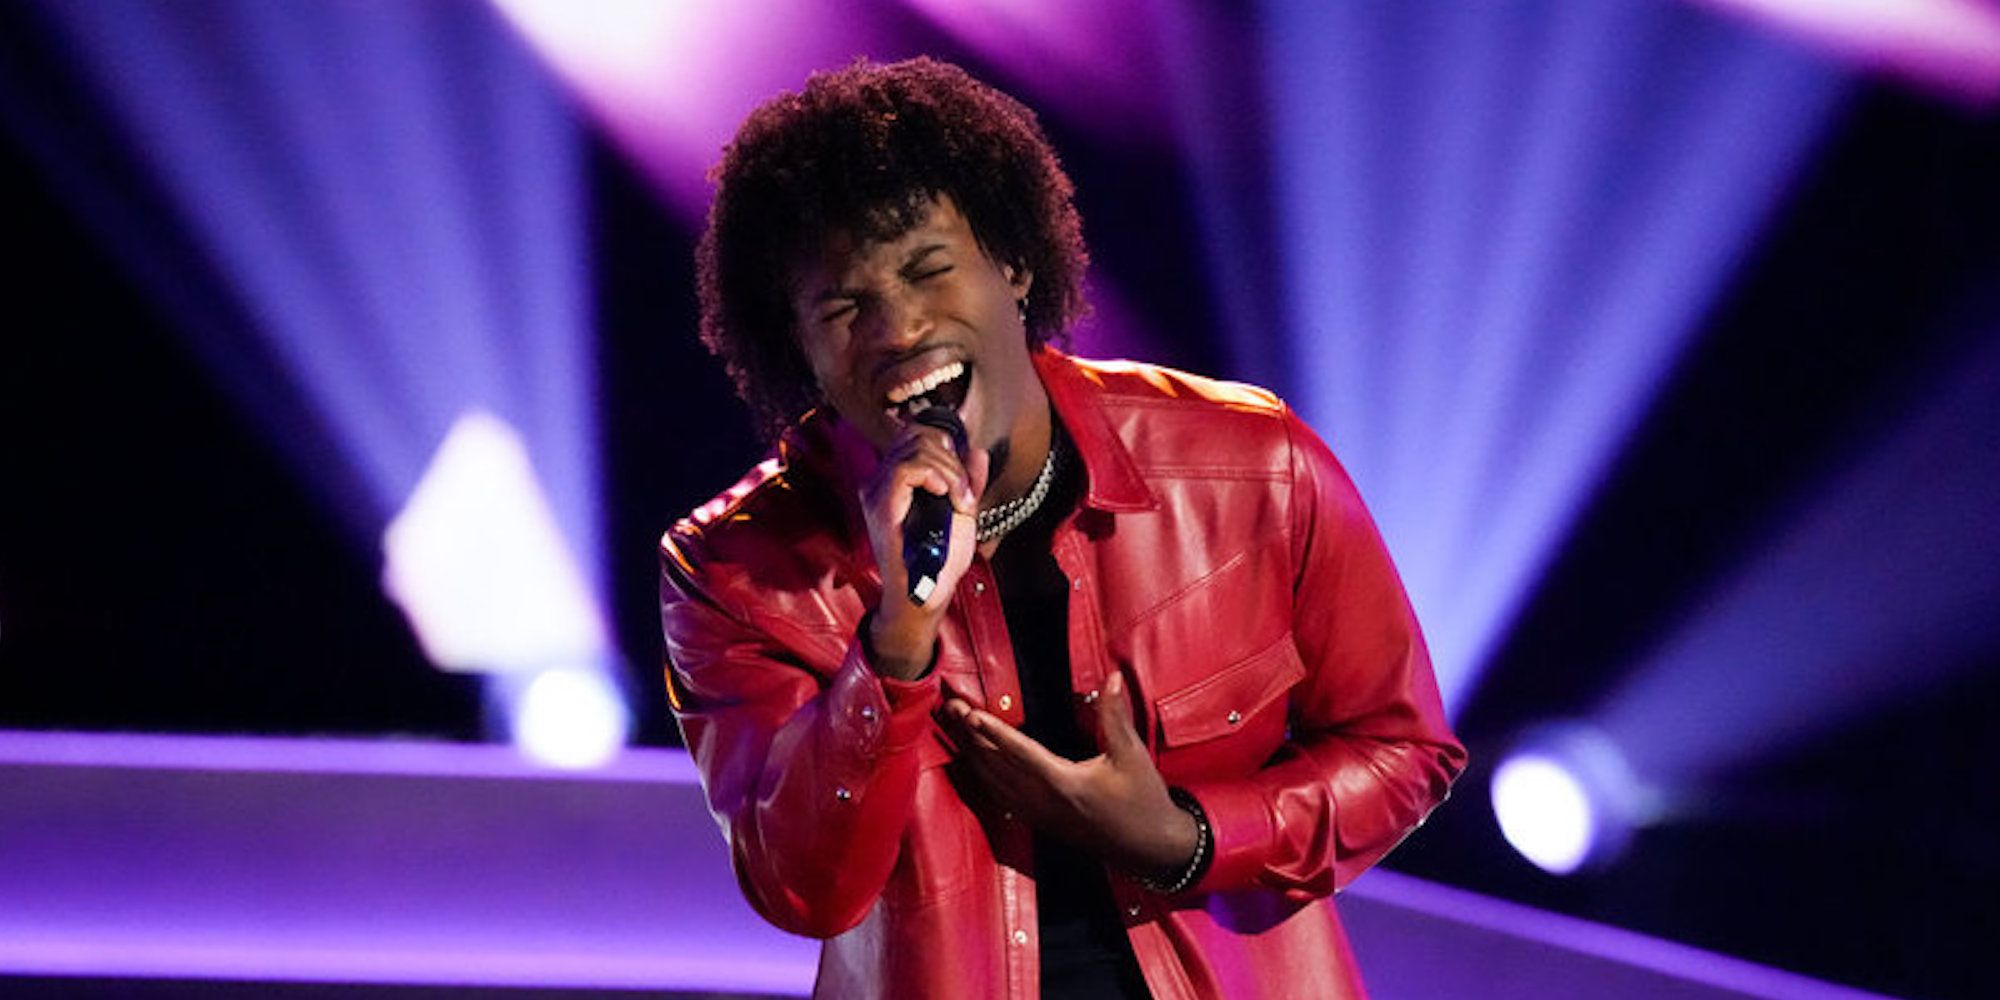 Vocalist Rletto auditions passionately on 'The Voice'